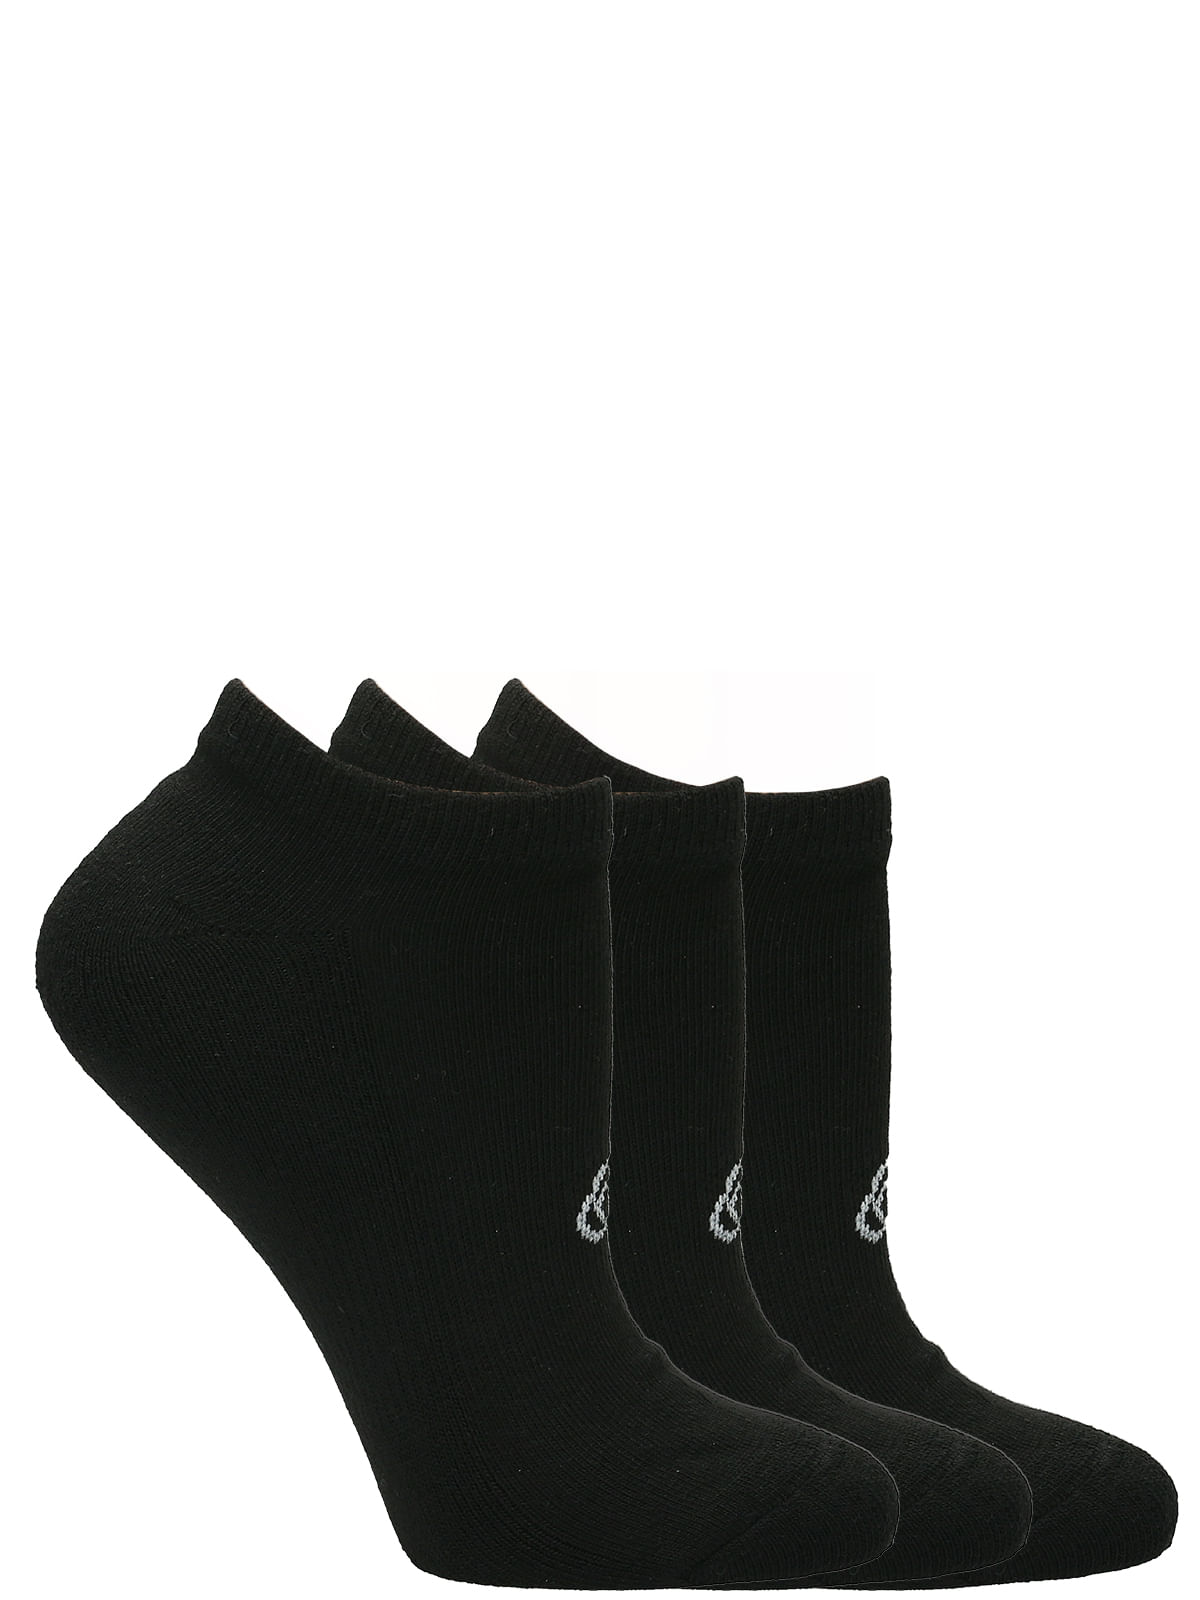 Calcetines Mujer 3 Pack Low Cut Negro